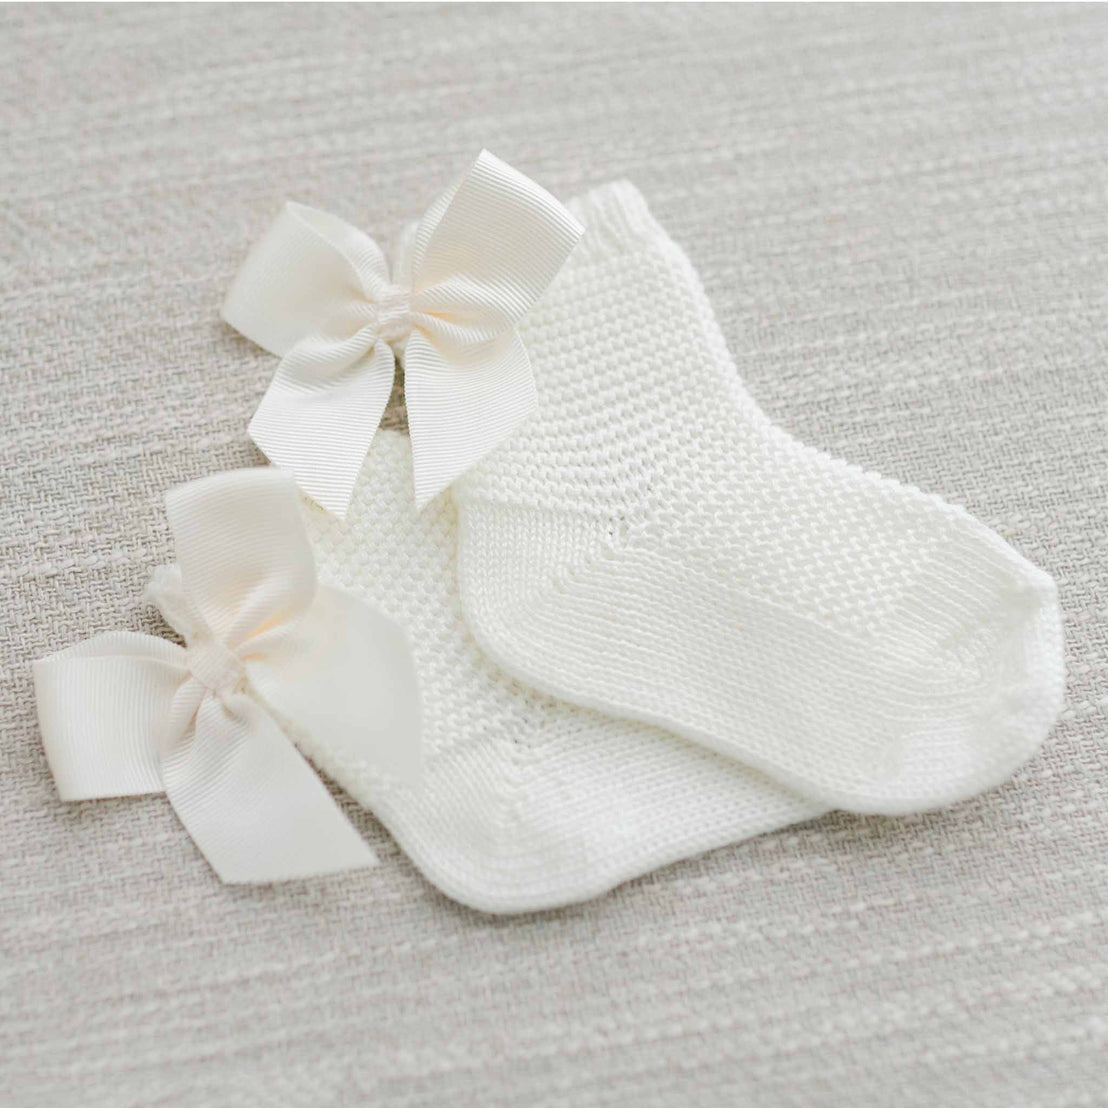 A pair of Garter Stitch Socks with Bow adorned with delicate white satin bows, presented on a soft-textured light gray background.